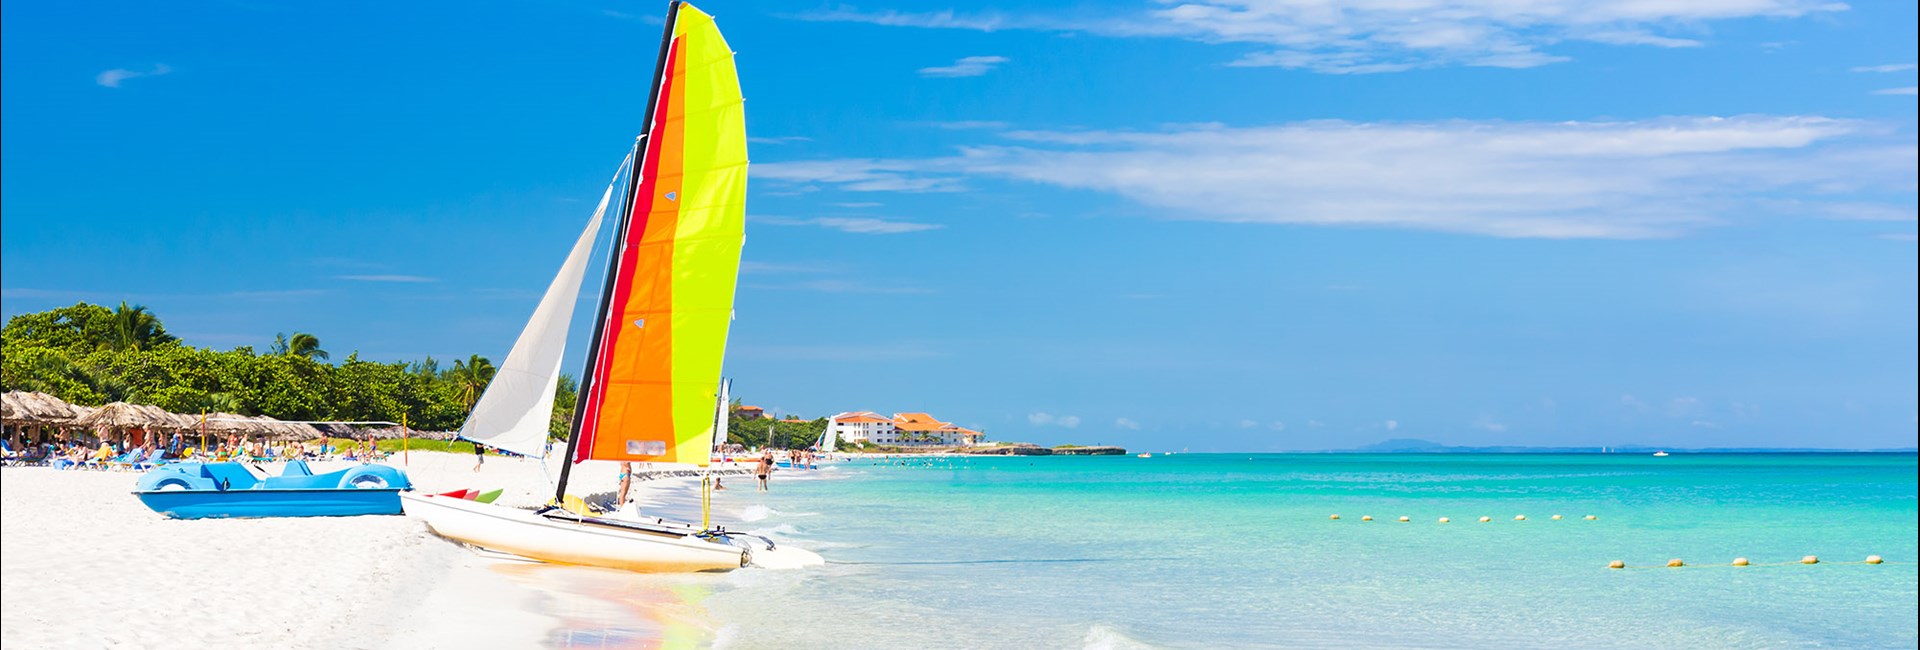  Sailing boat with colourful sail reflecting in the calm, clear blue sea next to a white sand beach 